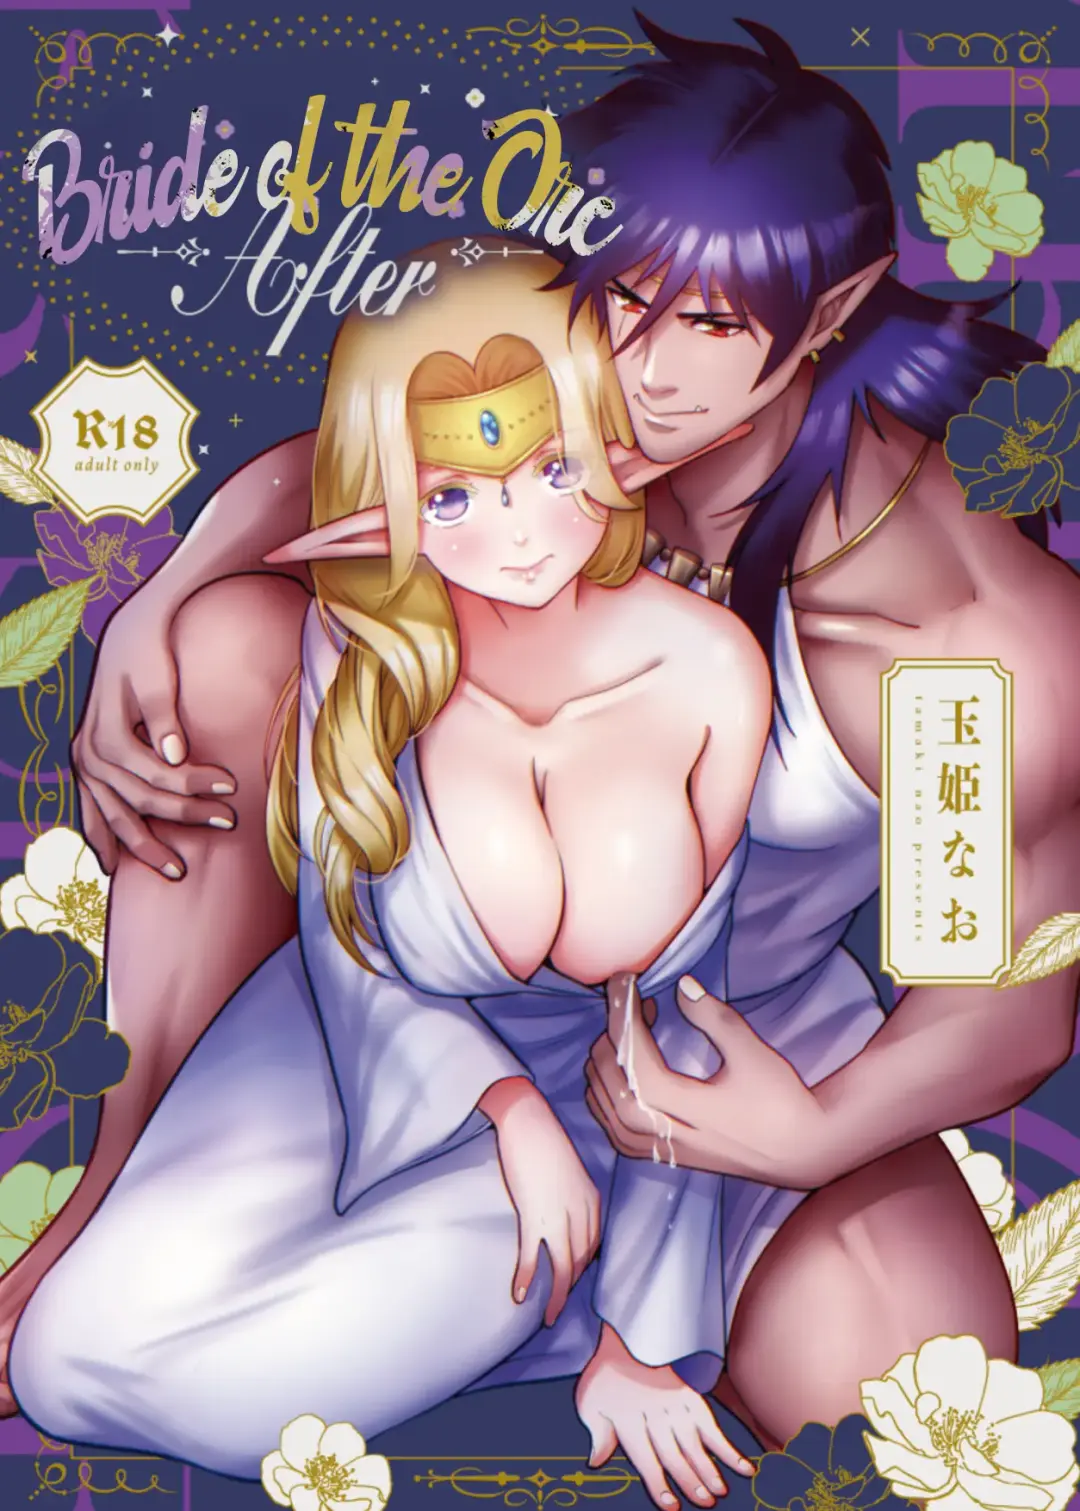 Read [Tamaki Nao] Orc no Hanayome After | Bride of the Orc After - Fhentai.net